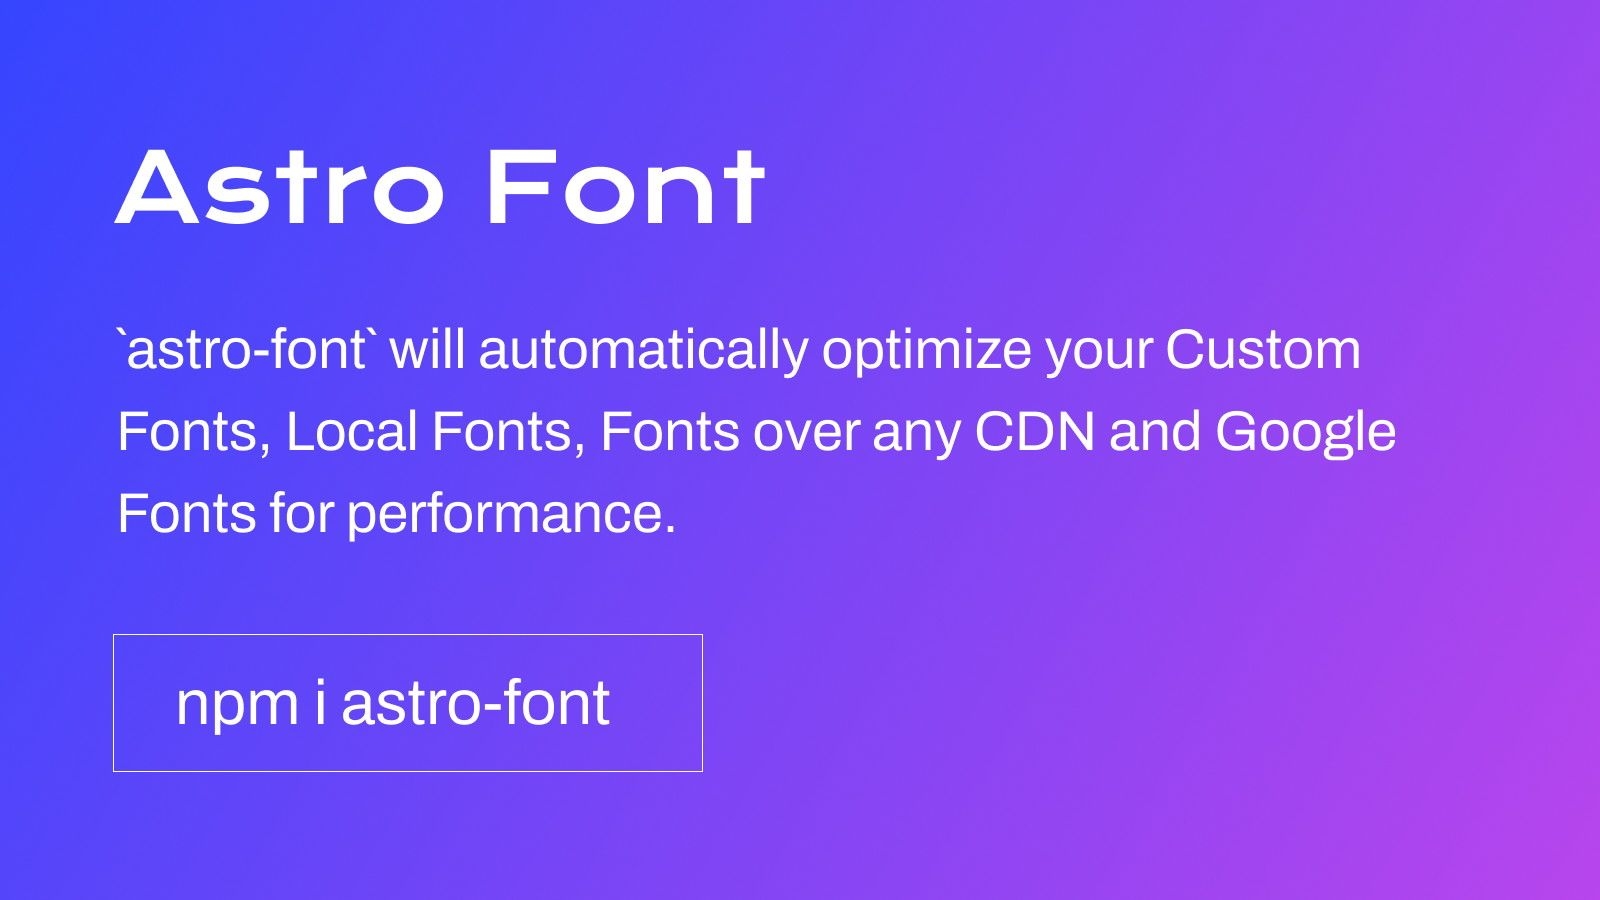 When to preload fonts?